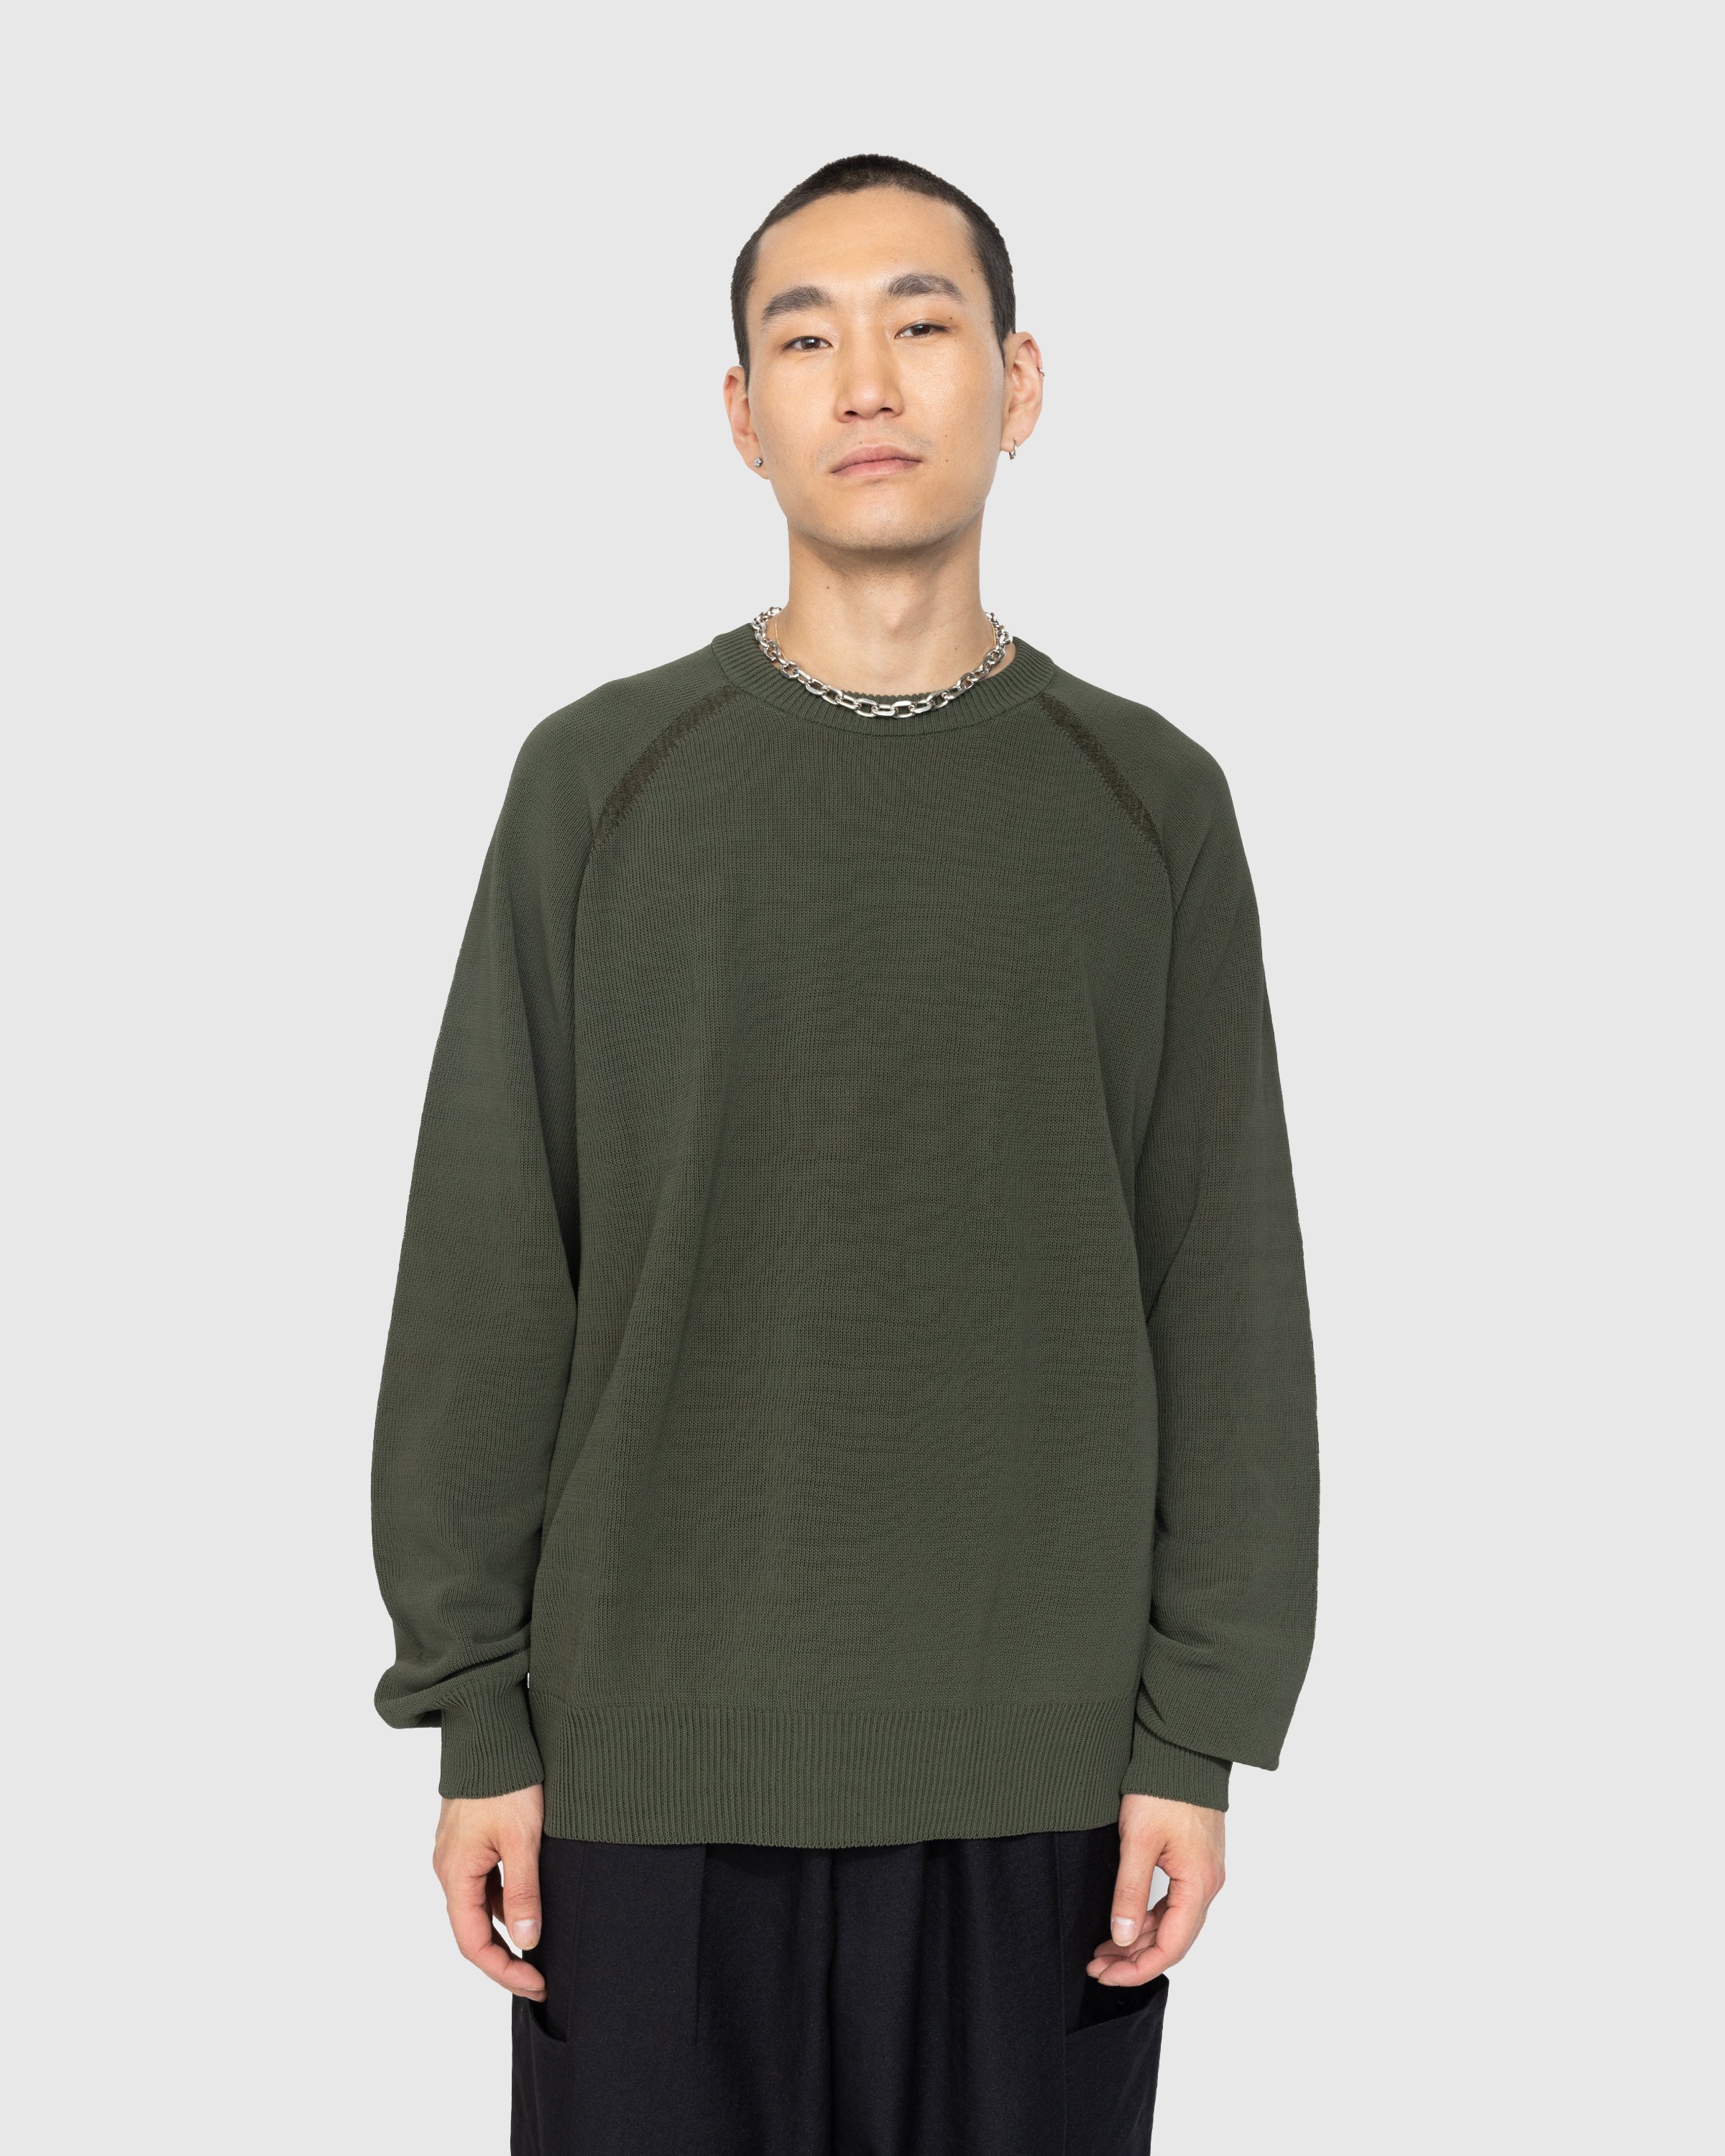 Y-3 - CL Knitted CR Sweater - Clothing - Green - Image 2